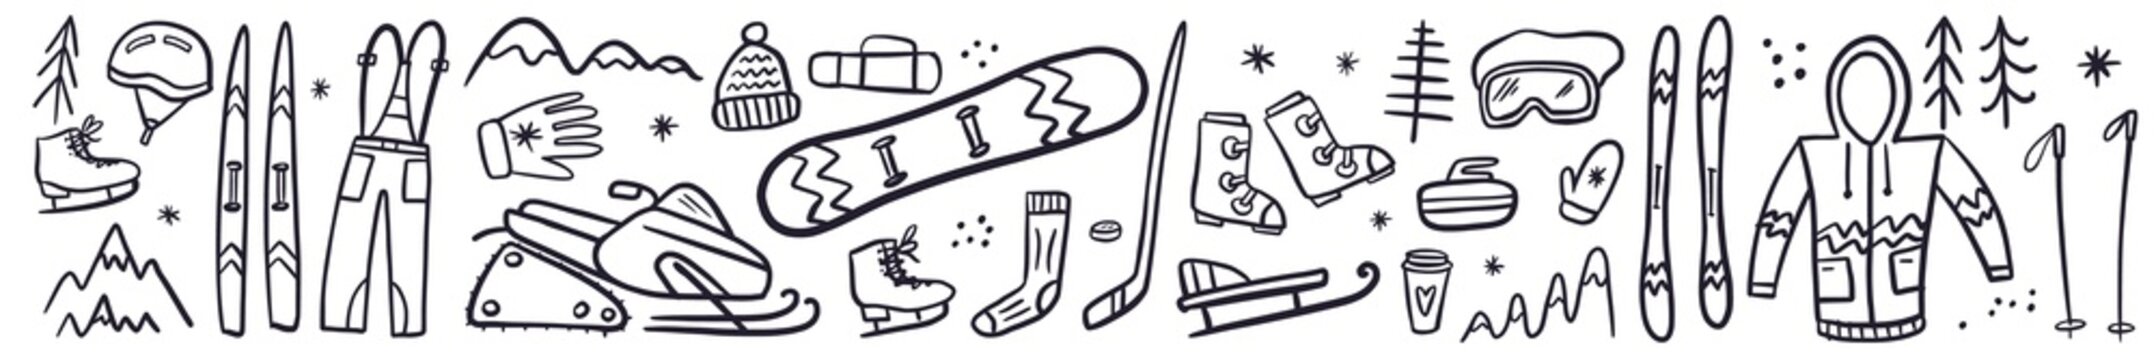 Vector horizontal collection of symbols for skiing and winter sports, hand-drawn in the style of doodles